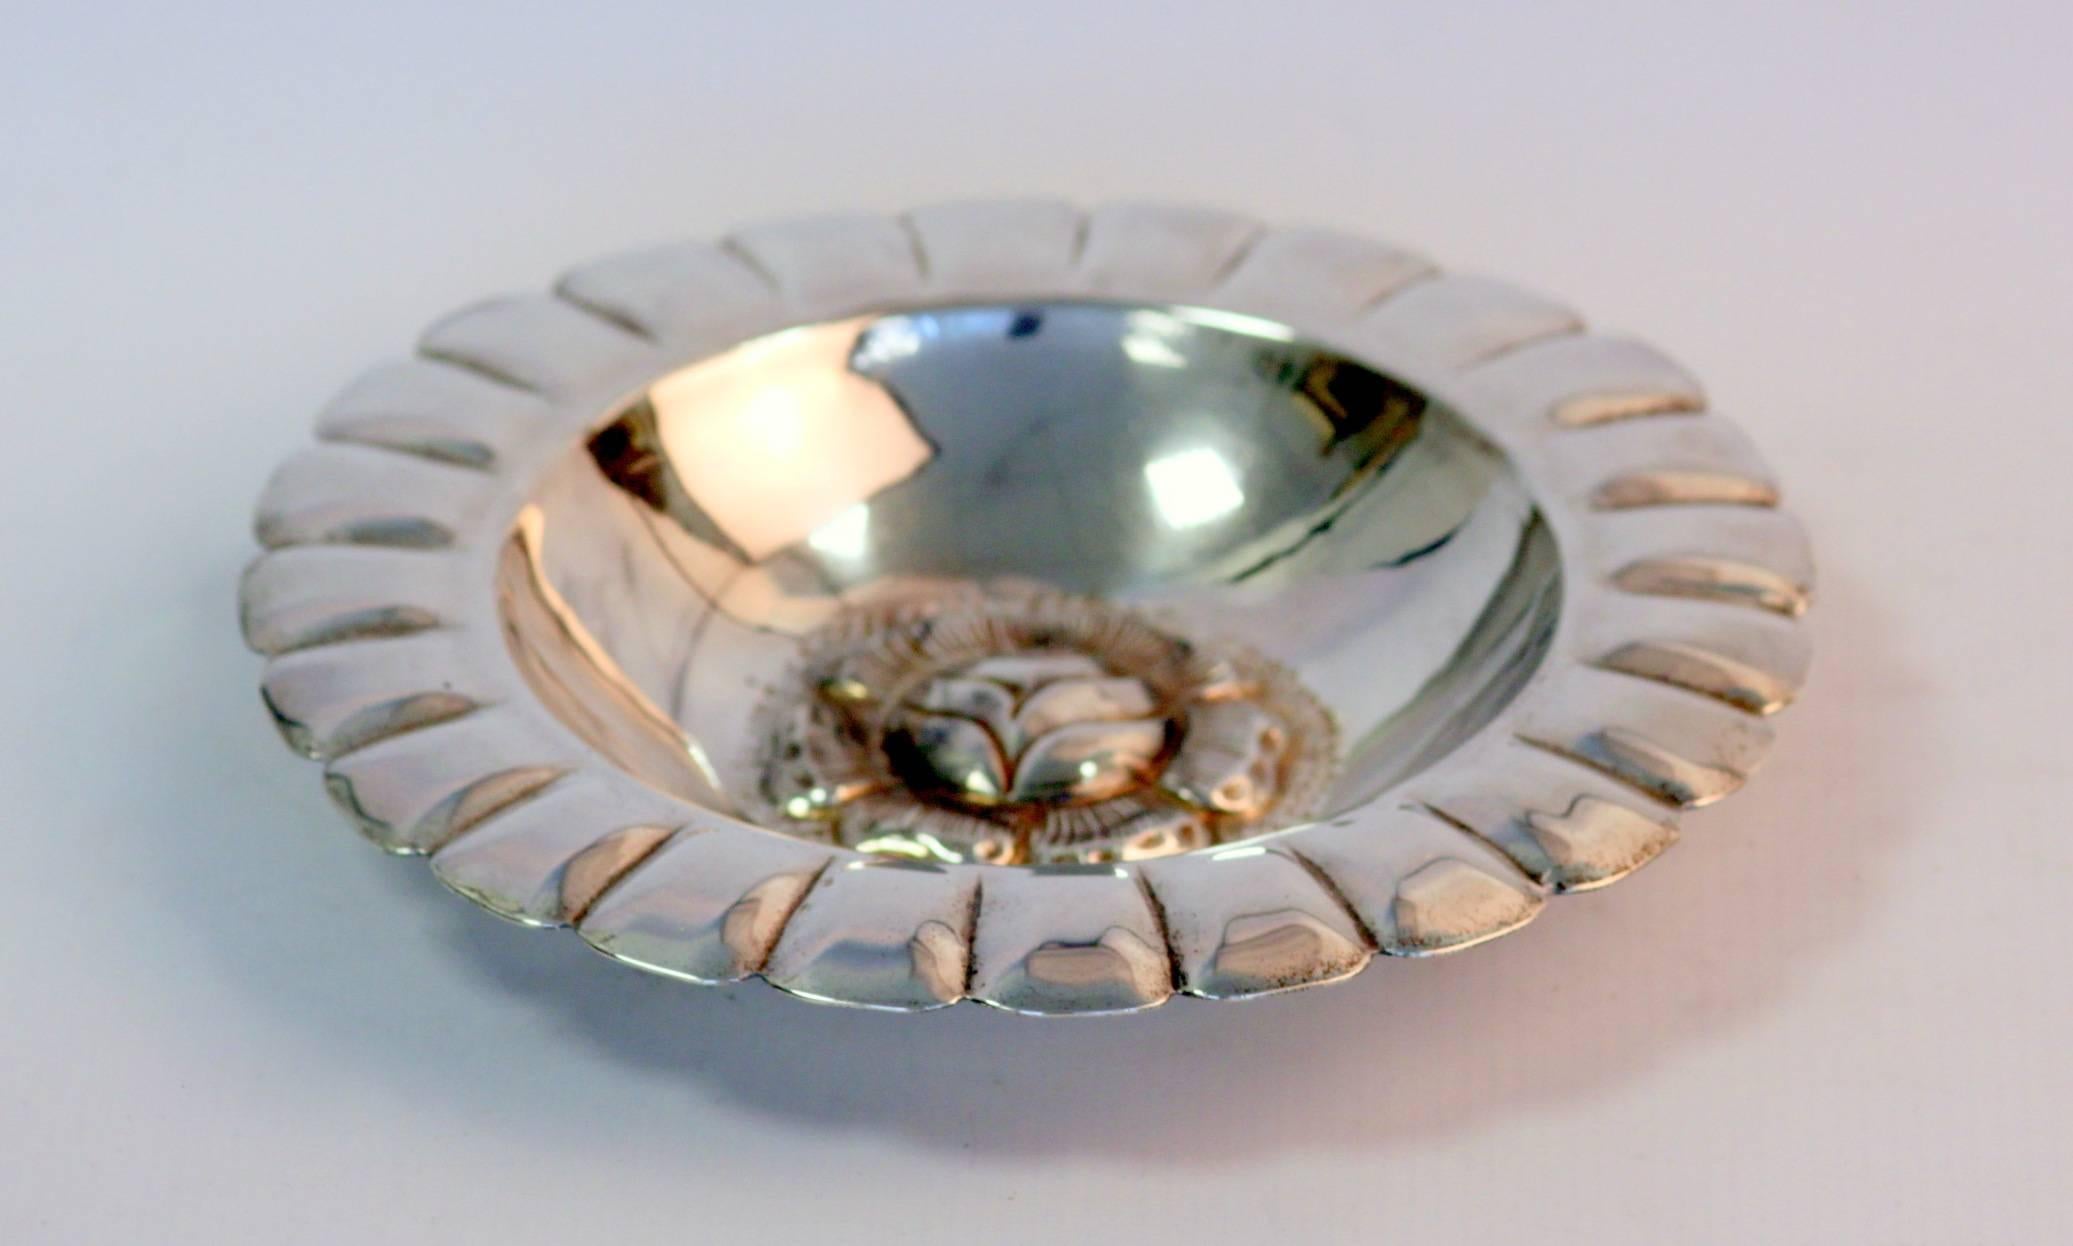 Floral engraved dish 
Made from Sterling Silver. 
Made in : Circa 1950's 
Maker : Maciel 
Fully Hallmarked 

Dimensions - 
Diameter x Height : 20.3 x 3 cm 
Weight : 300 grams 

Condition: General used, has some minor scratches and scuffs, has a